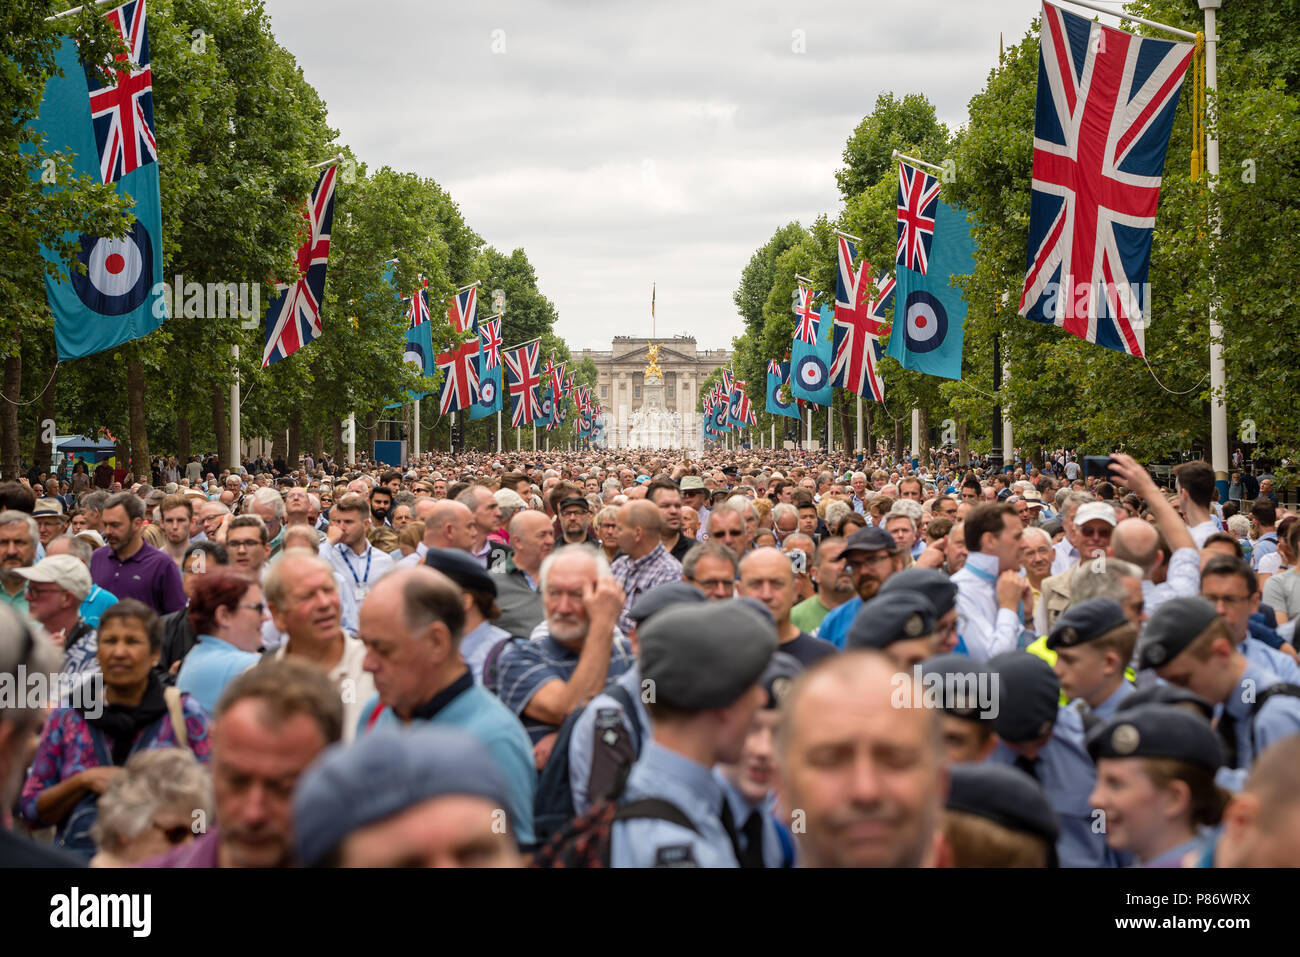 Crowds gather along The Mall to help celebrate the 100th anniversary of the Royal Air Force (RAF). The crowds watch the Royal Air Force parade followed by the flypast over Buckingham Palace in London. Stock Photo